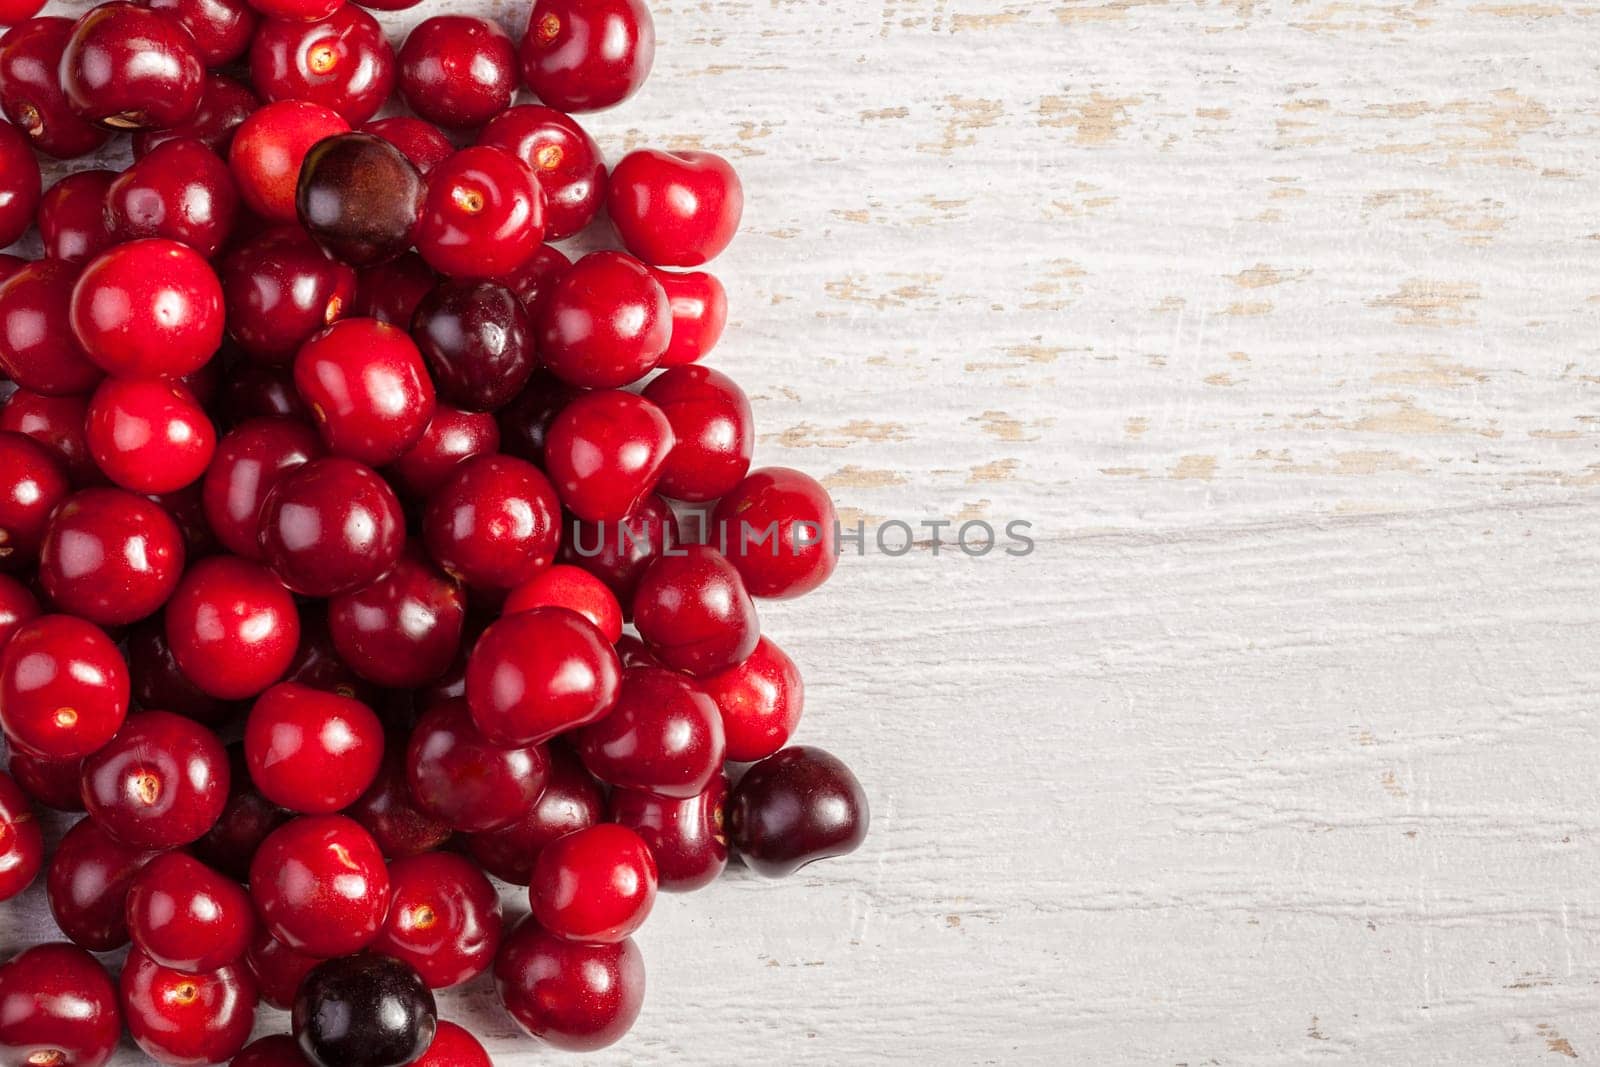 Juicy fresh cherry on wooden background. Vitamin, summer and healthy lifestyle